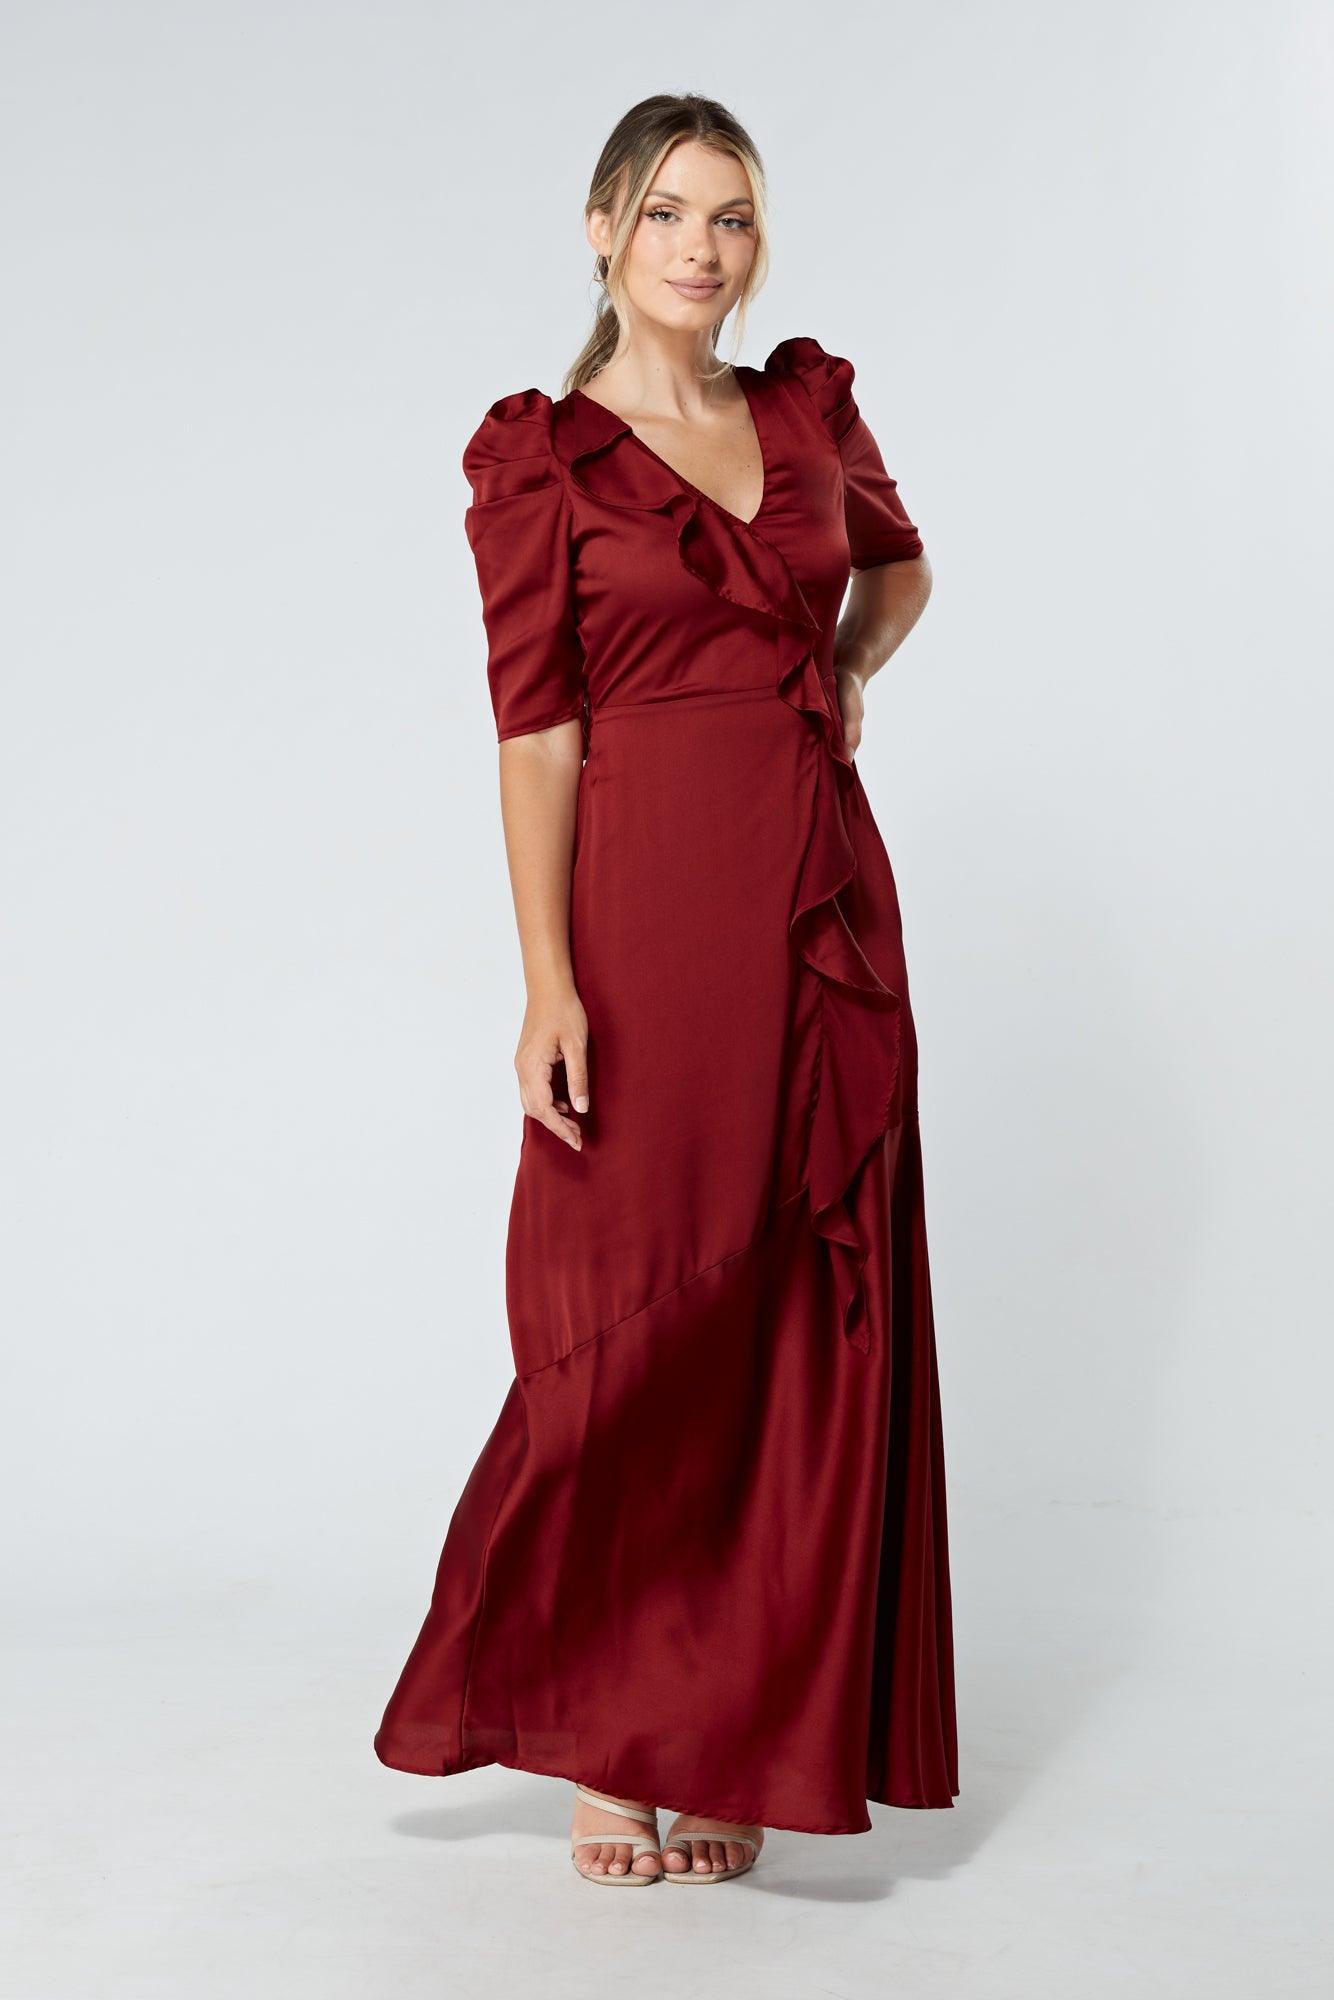 Daisy Copper Red Satin-Feel Crepe Maxi Dress With Ruched Sleeves - TAHLIRA